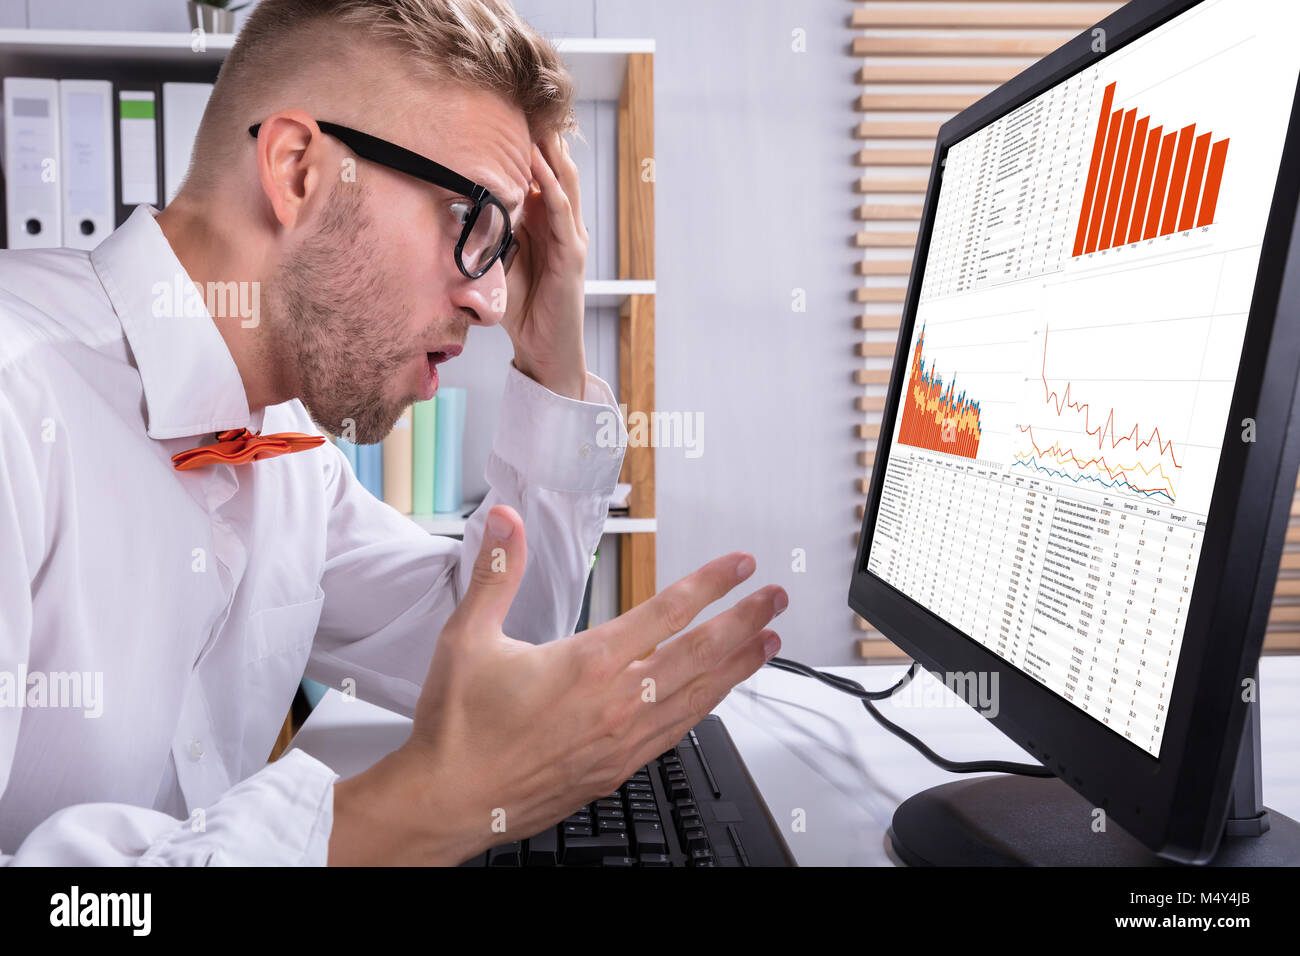 Worried Businessman Looking At Graph On Computer In Office Stock Photo